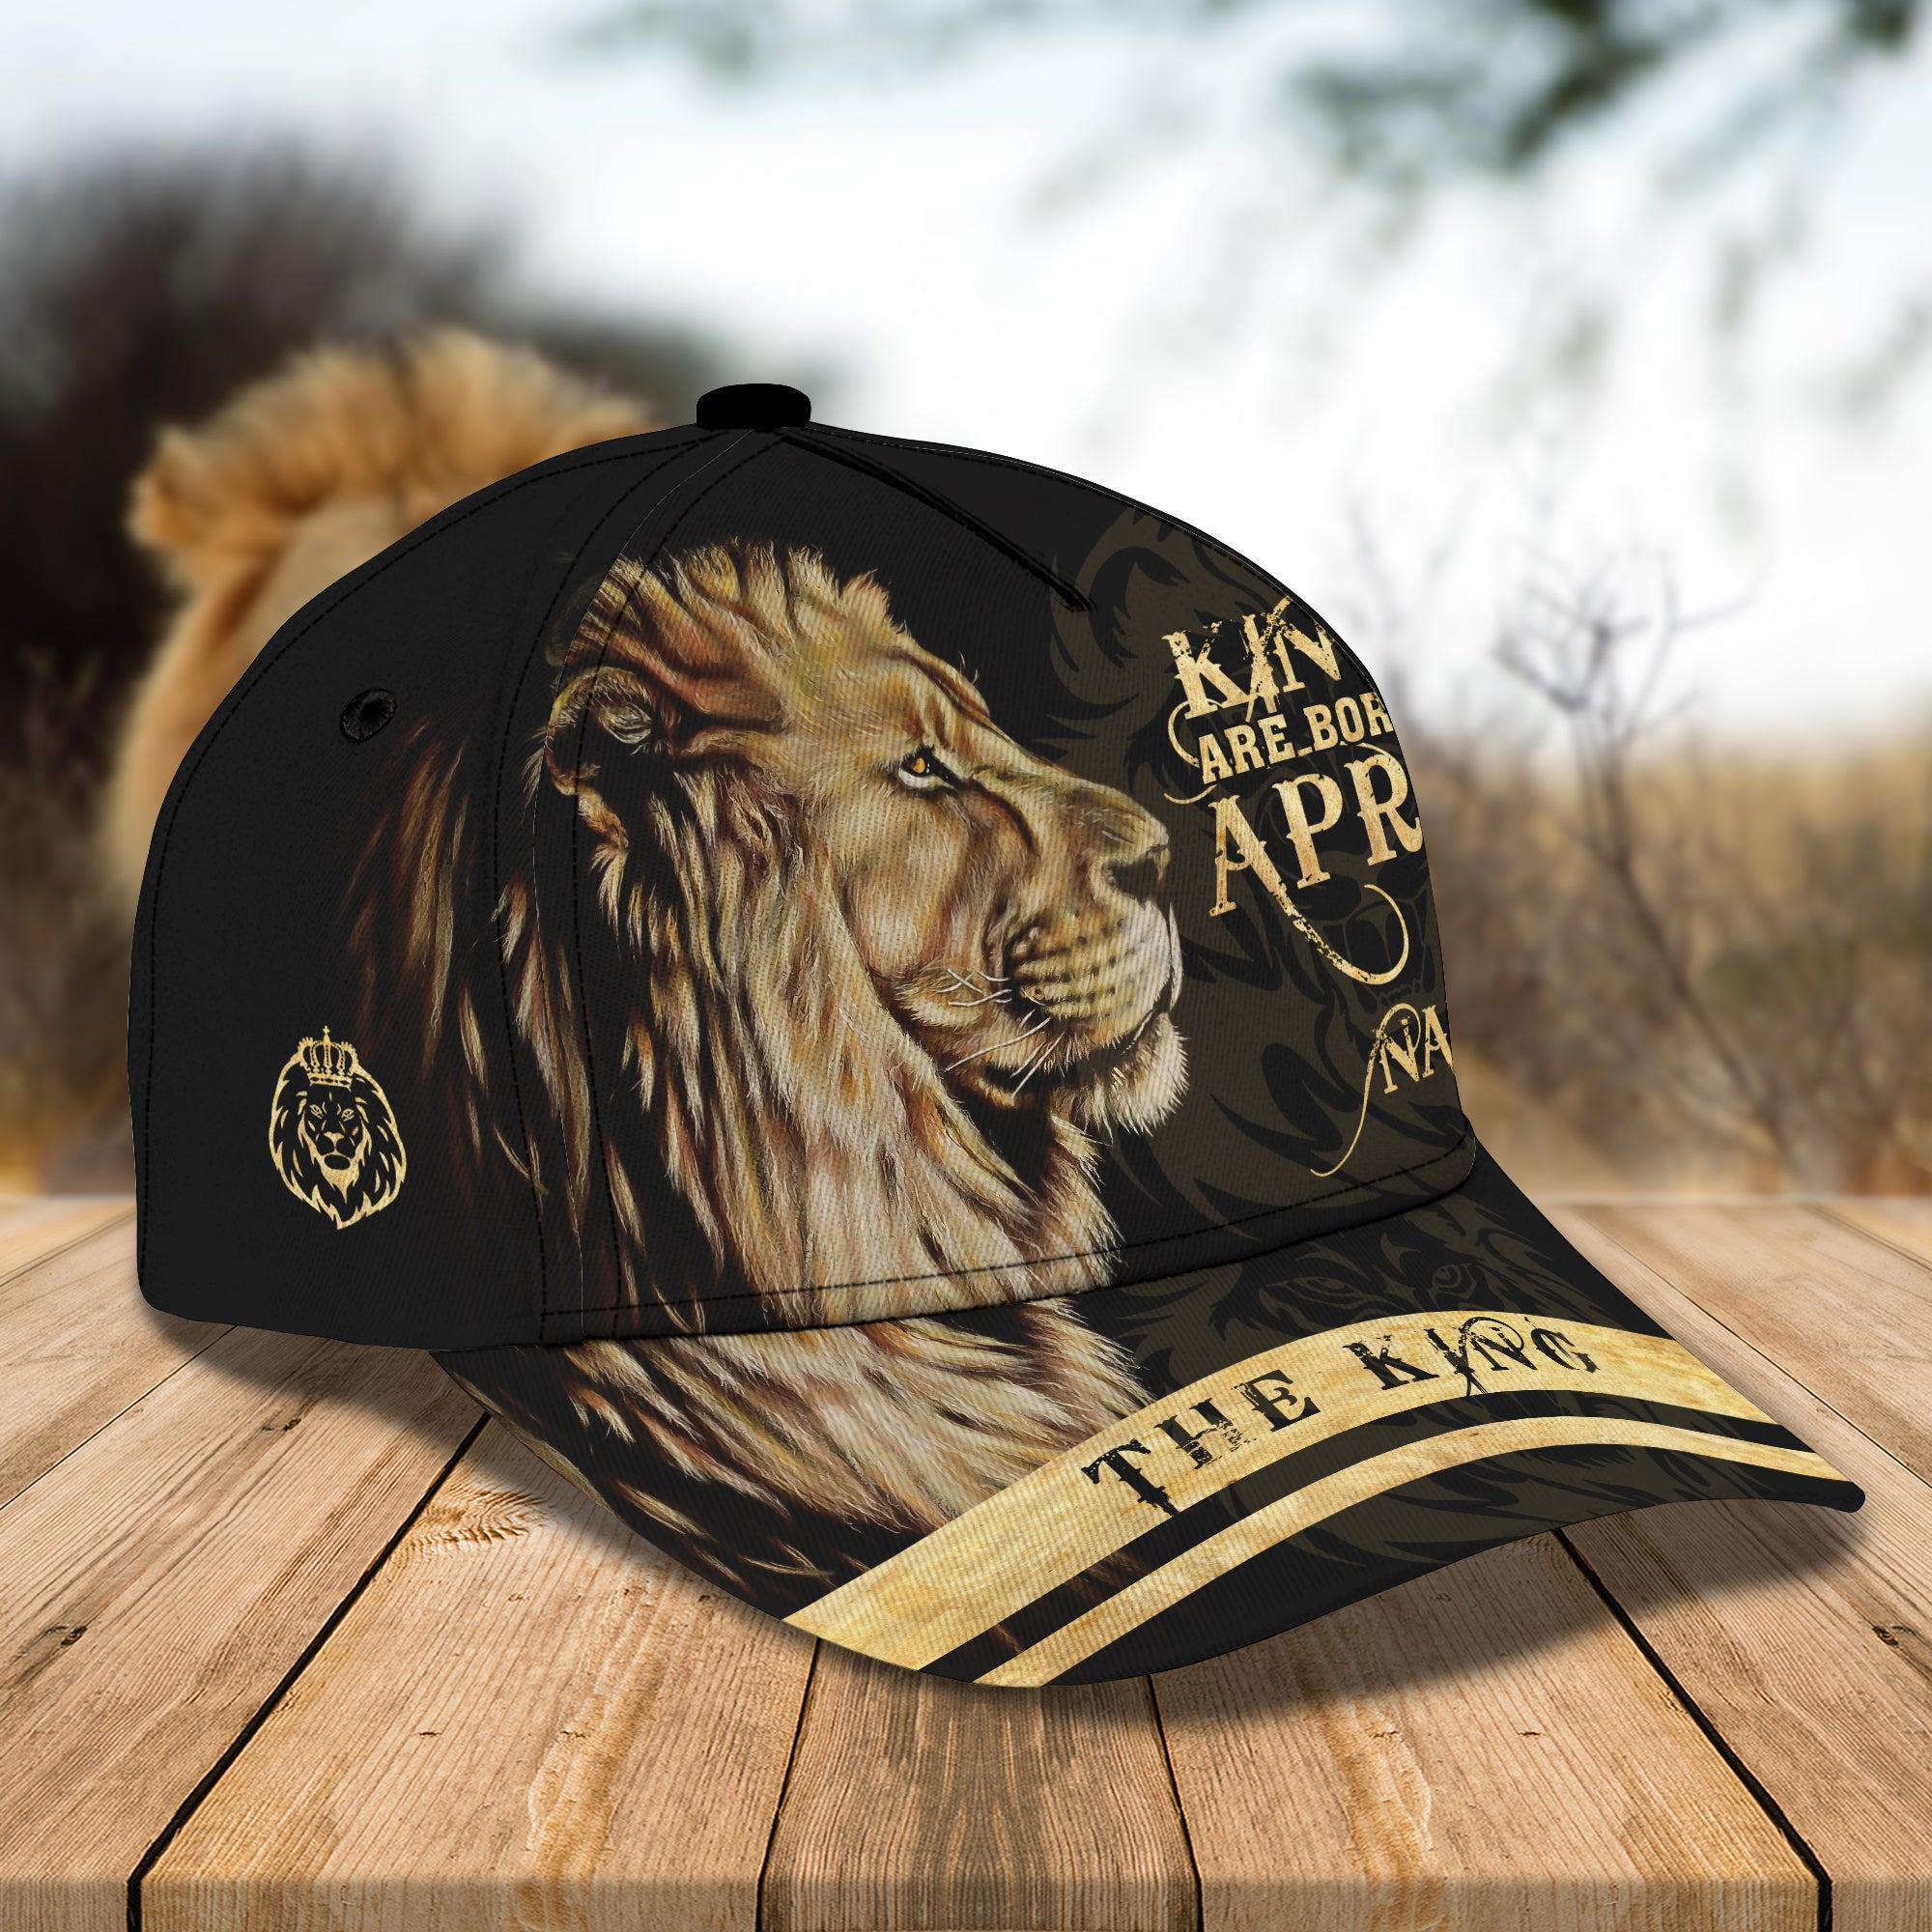 Kings Are Born In April - Personalized Name Cap 27 - Bhn97